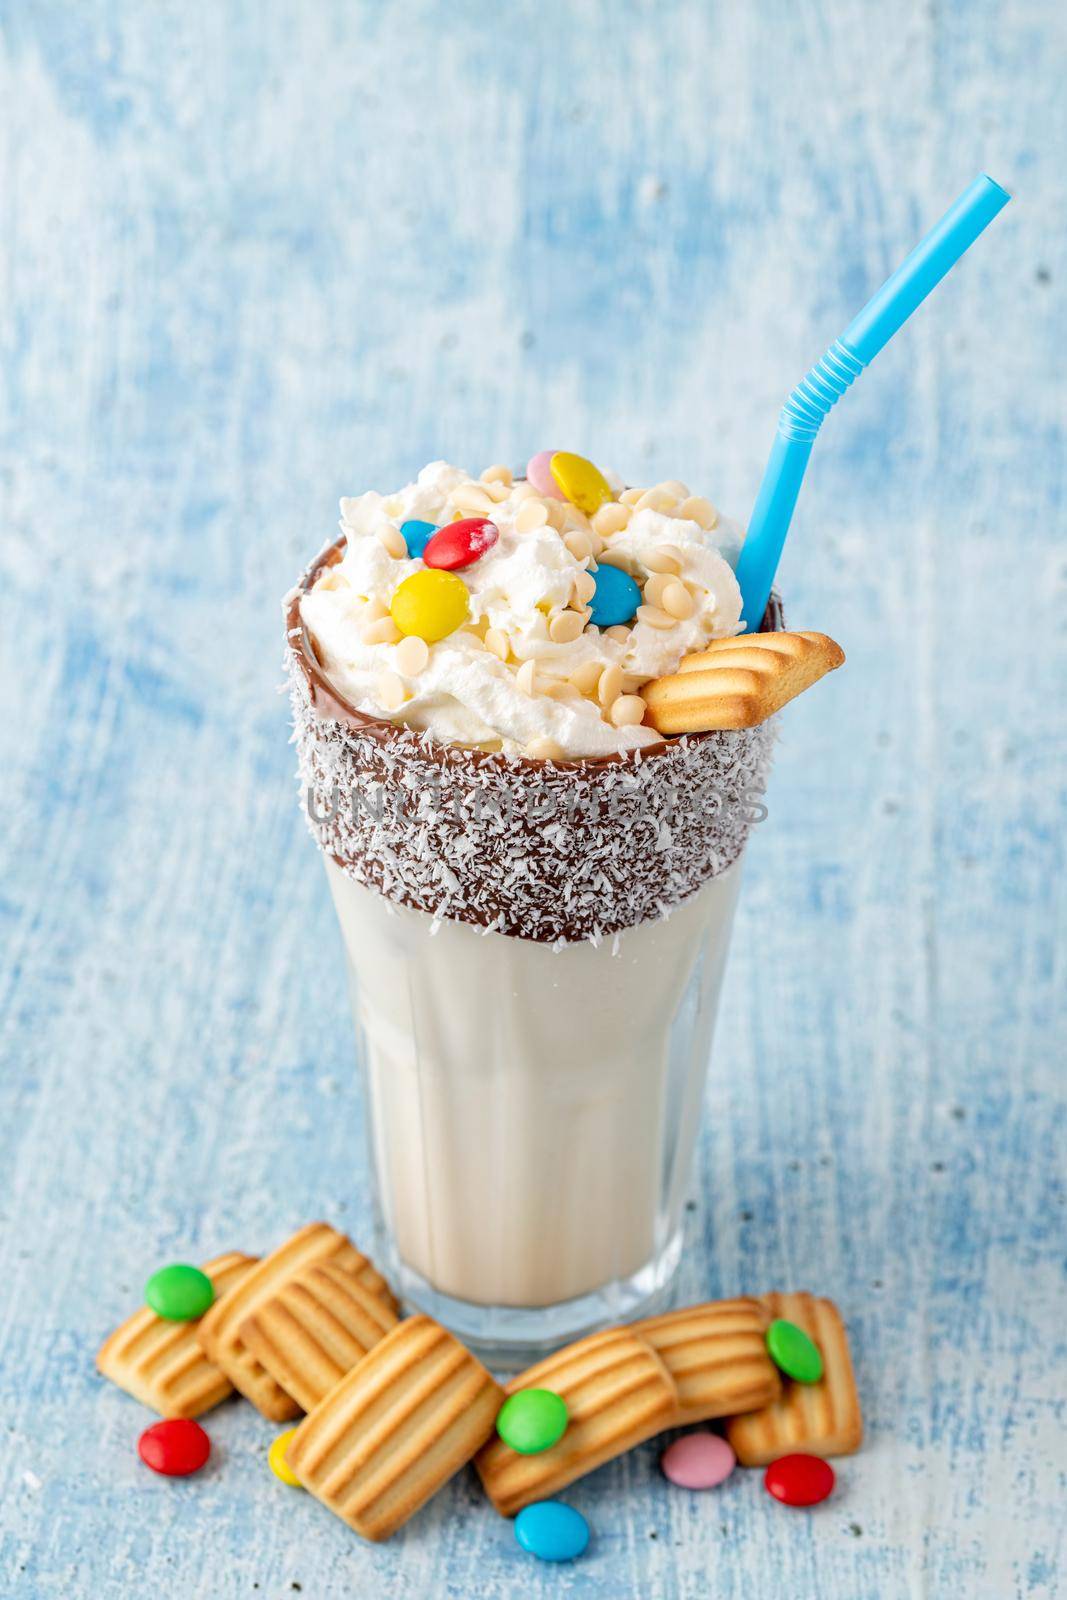 Milkshake with milk and baby biscuit decorated with dragee sugar.